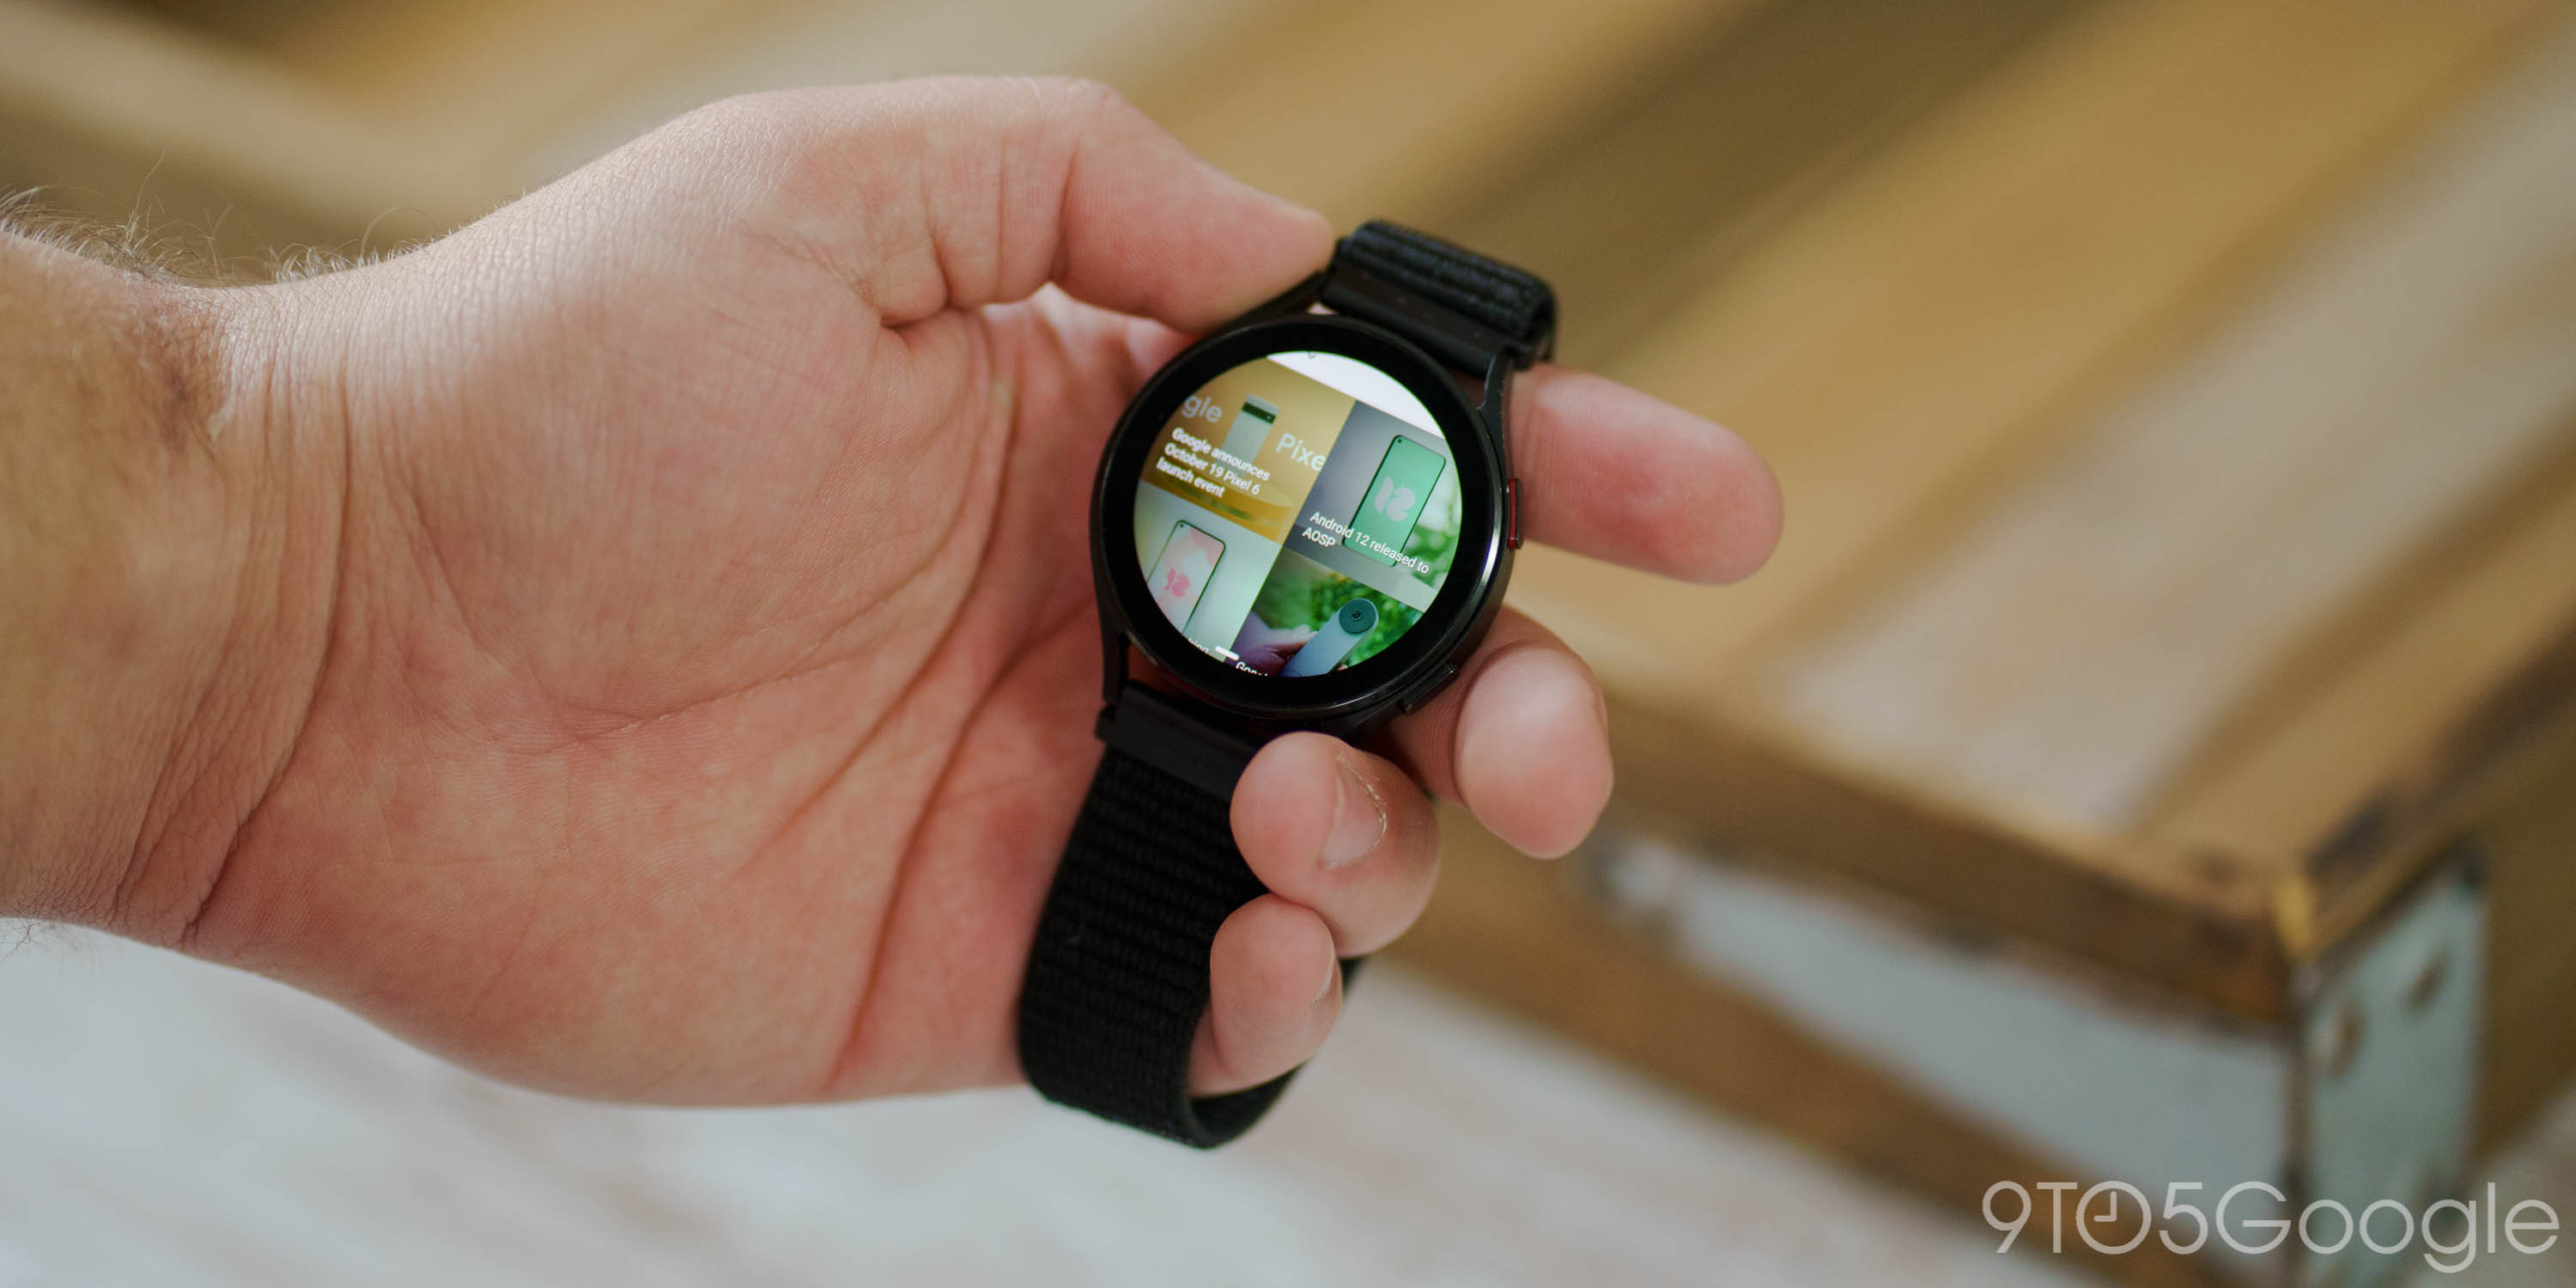 Mechanica strip meteoor Wear OS watches get an internet browser from Samsung - 9to5Google